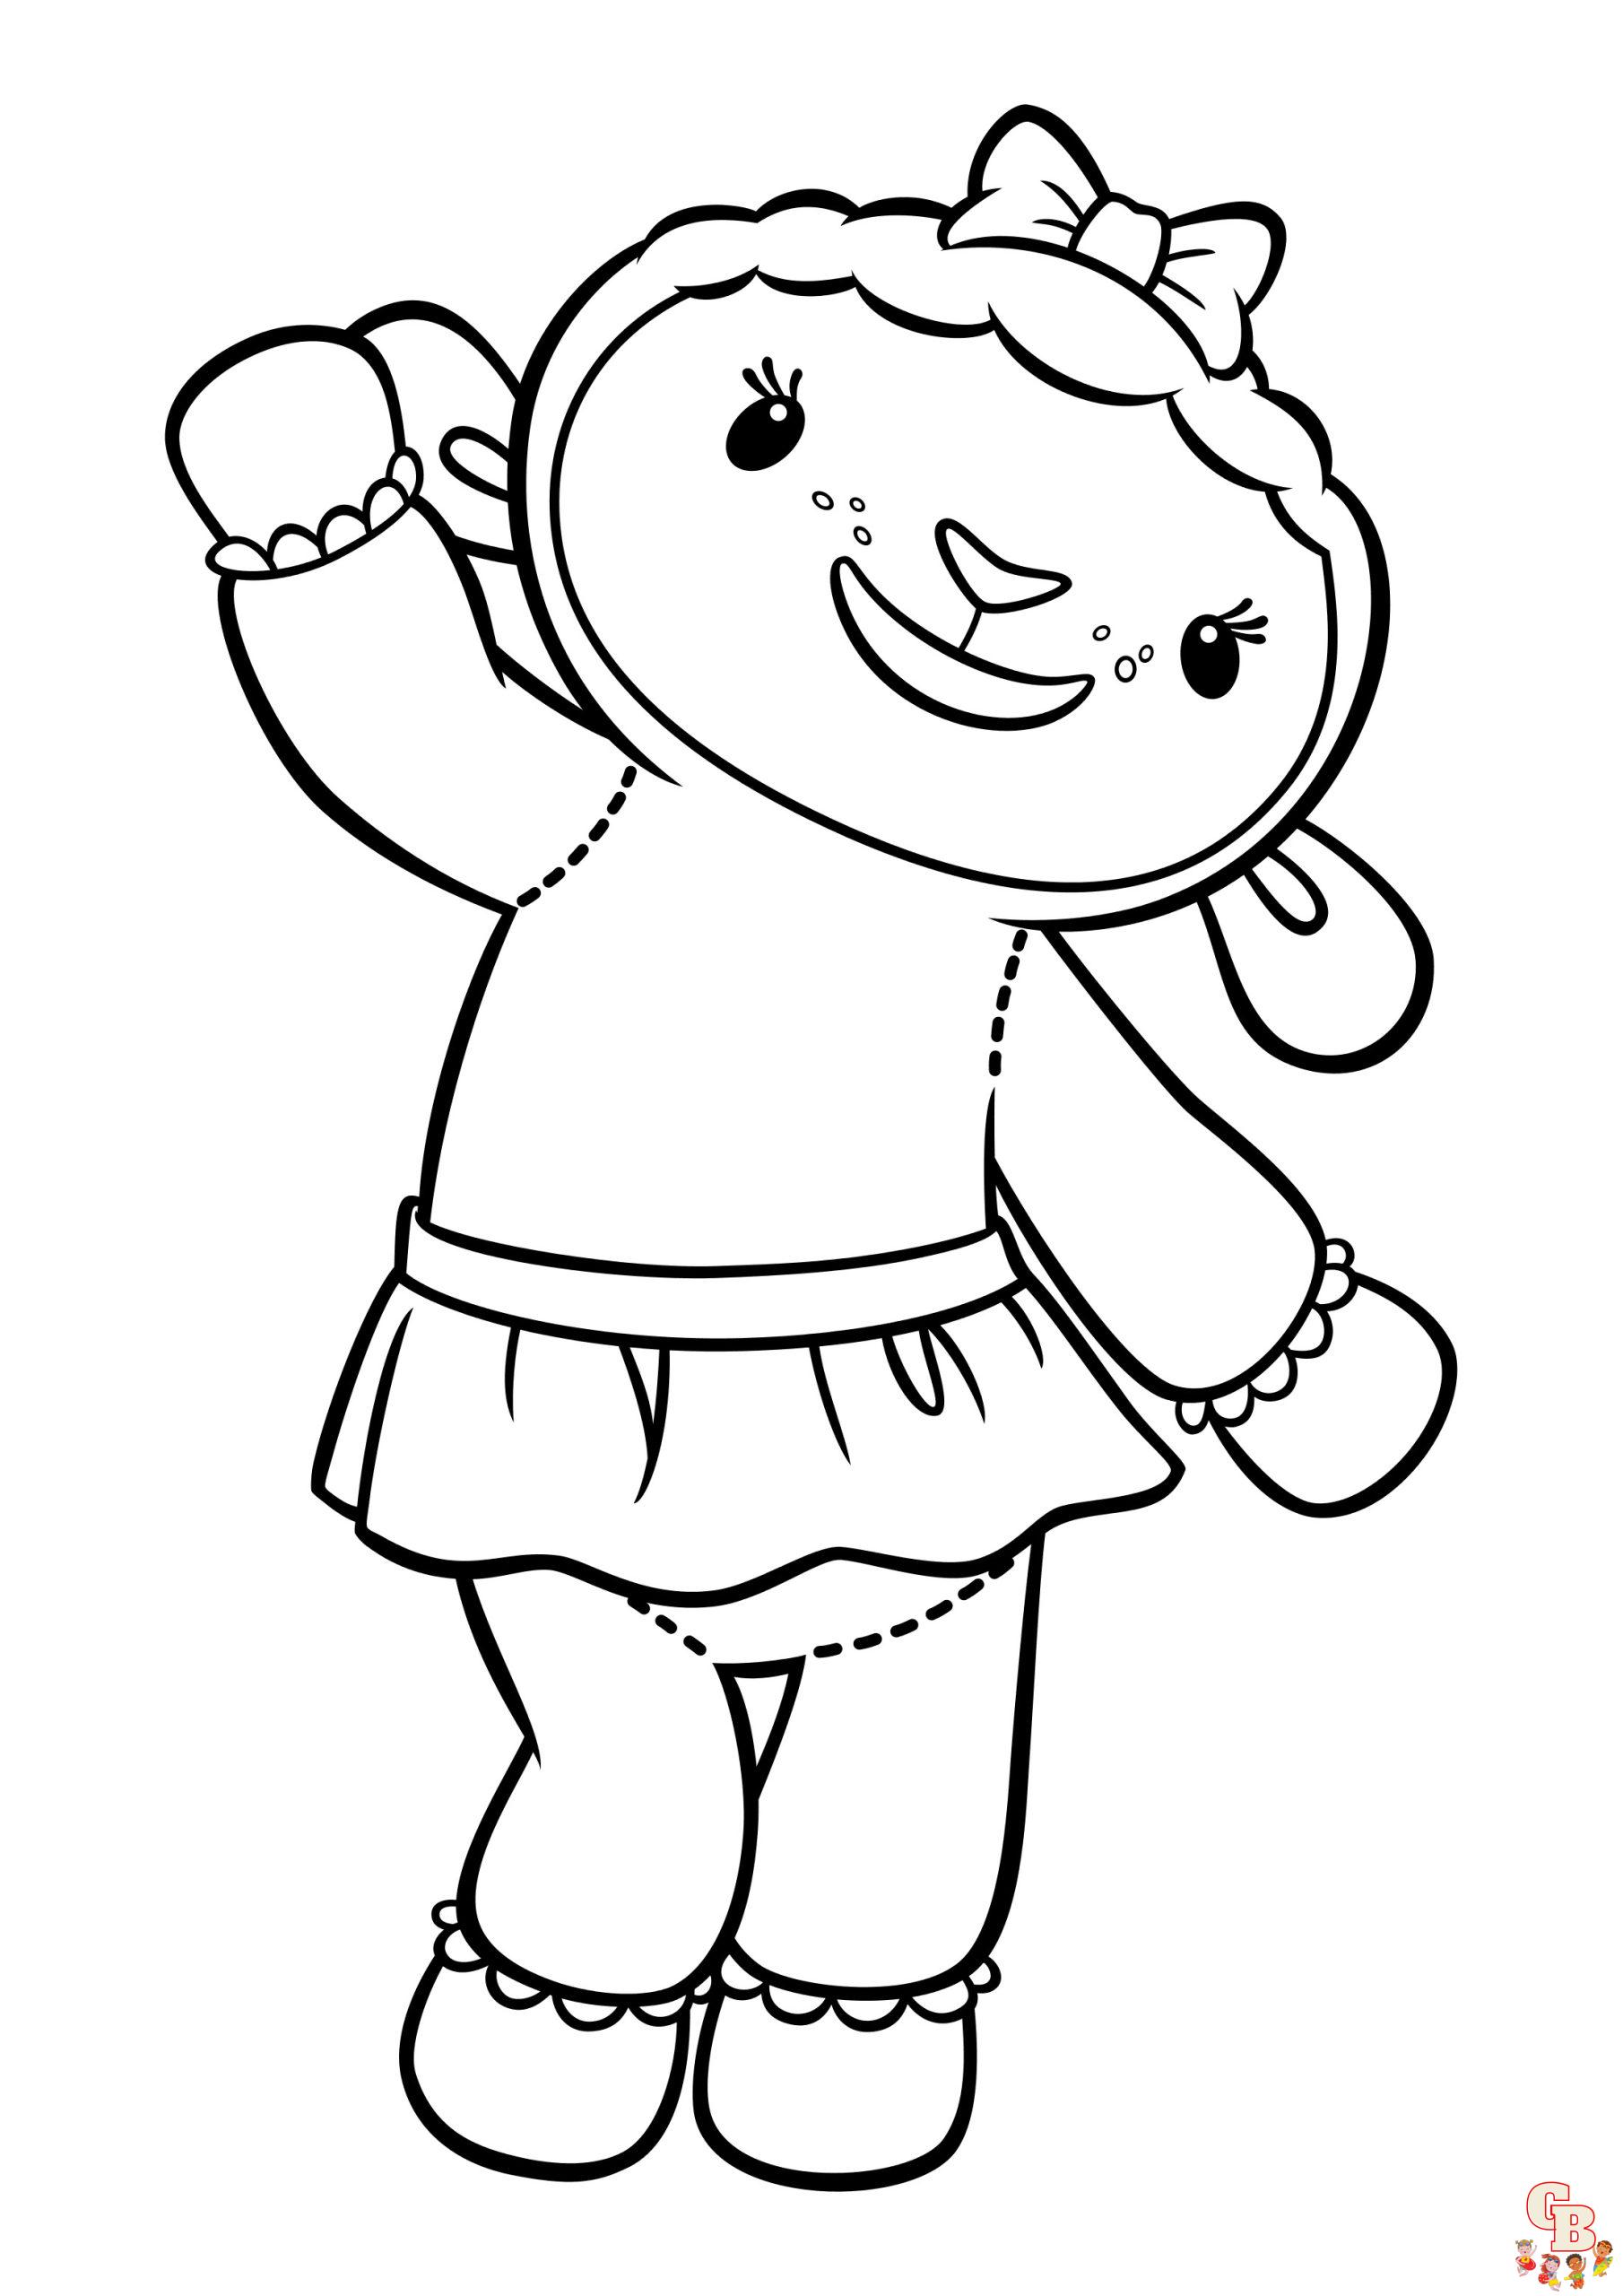 Cute Lambie coloring pages free